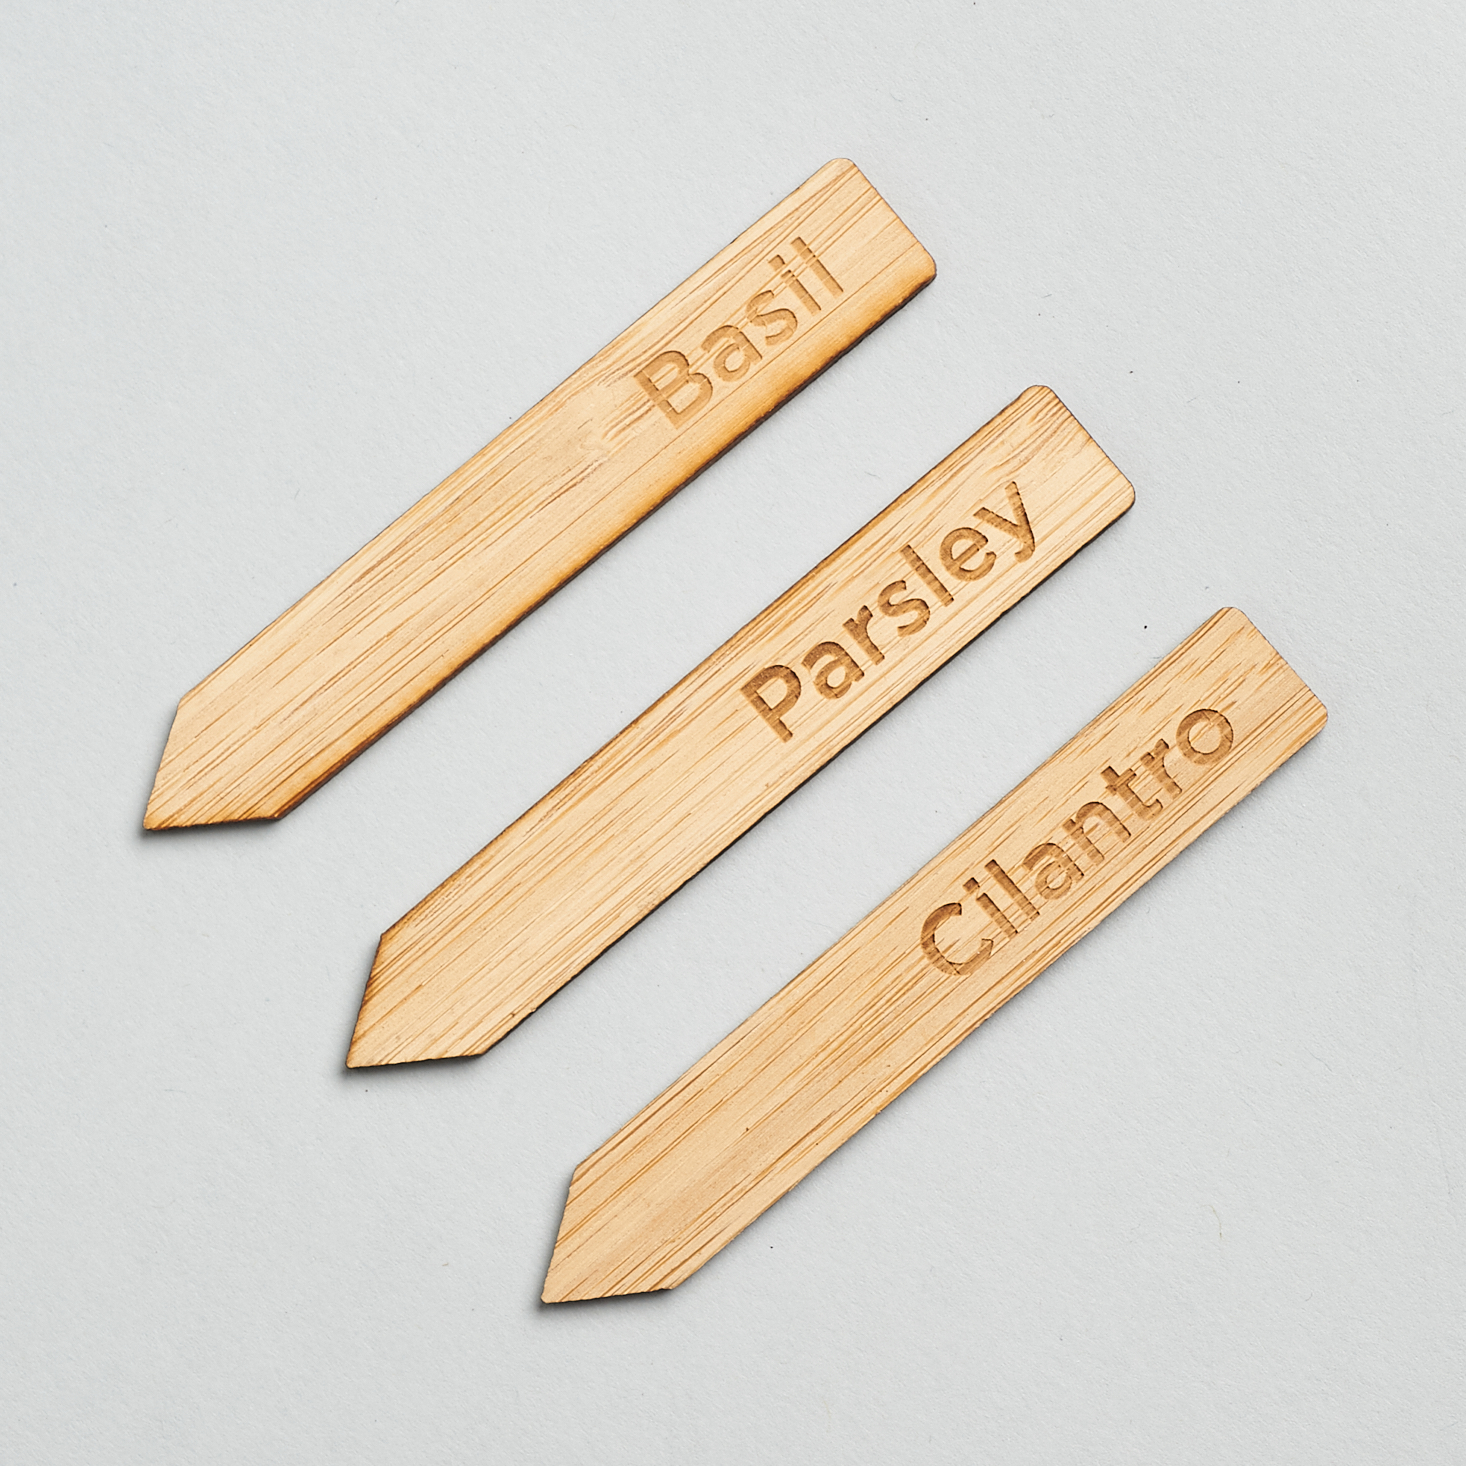 Wooden herb markers from Public Goods